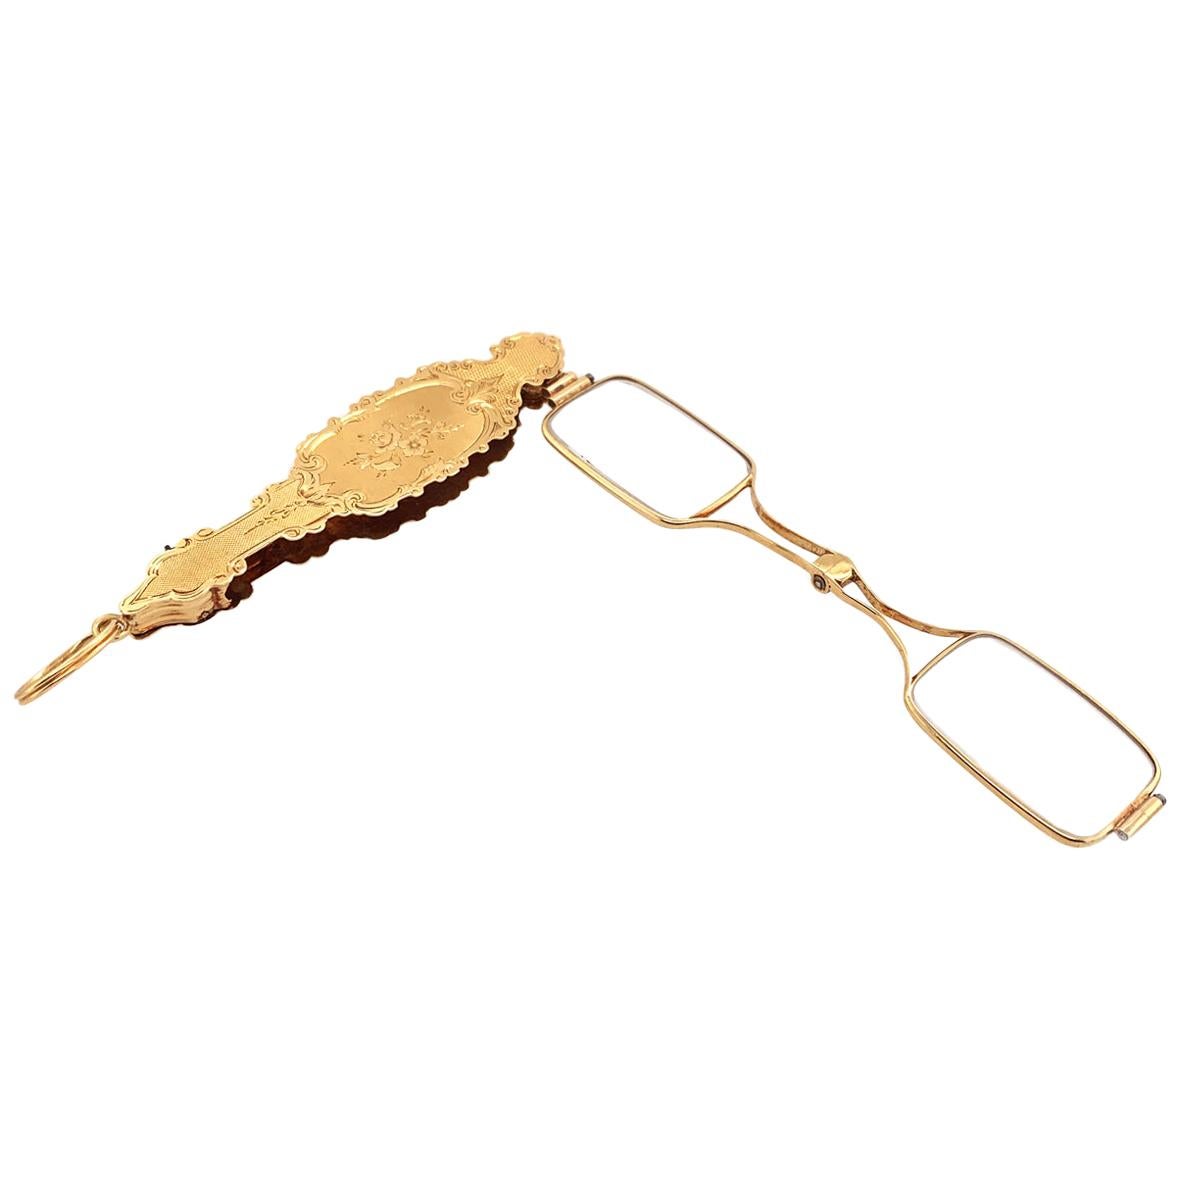 Antique French Gold Lorgnette